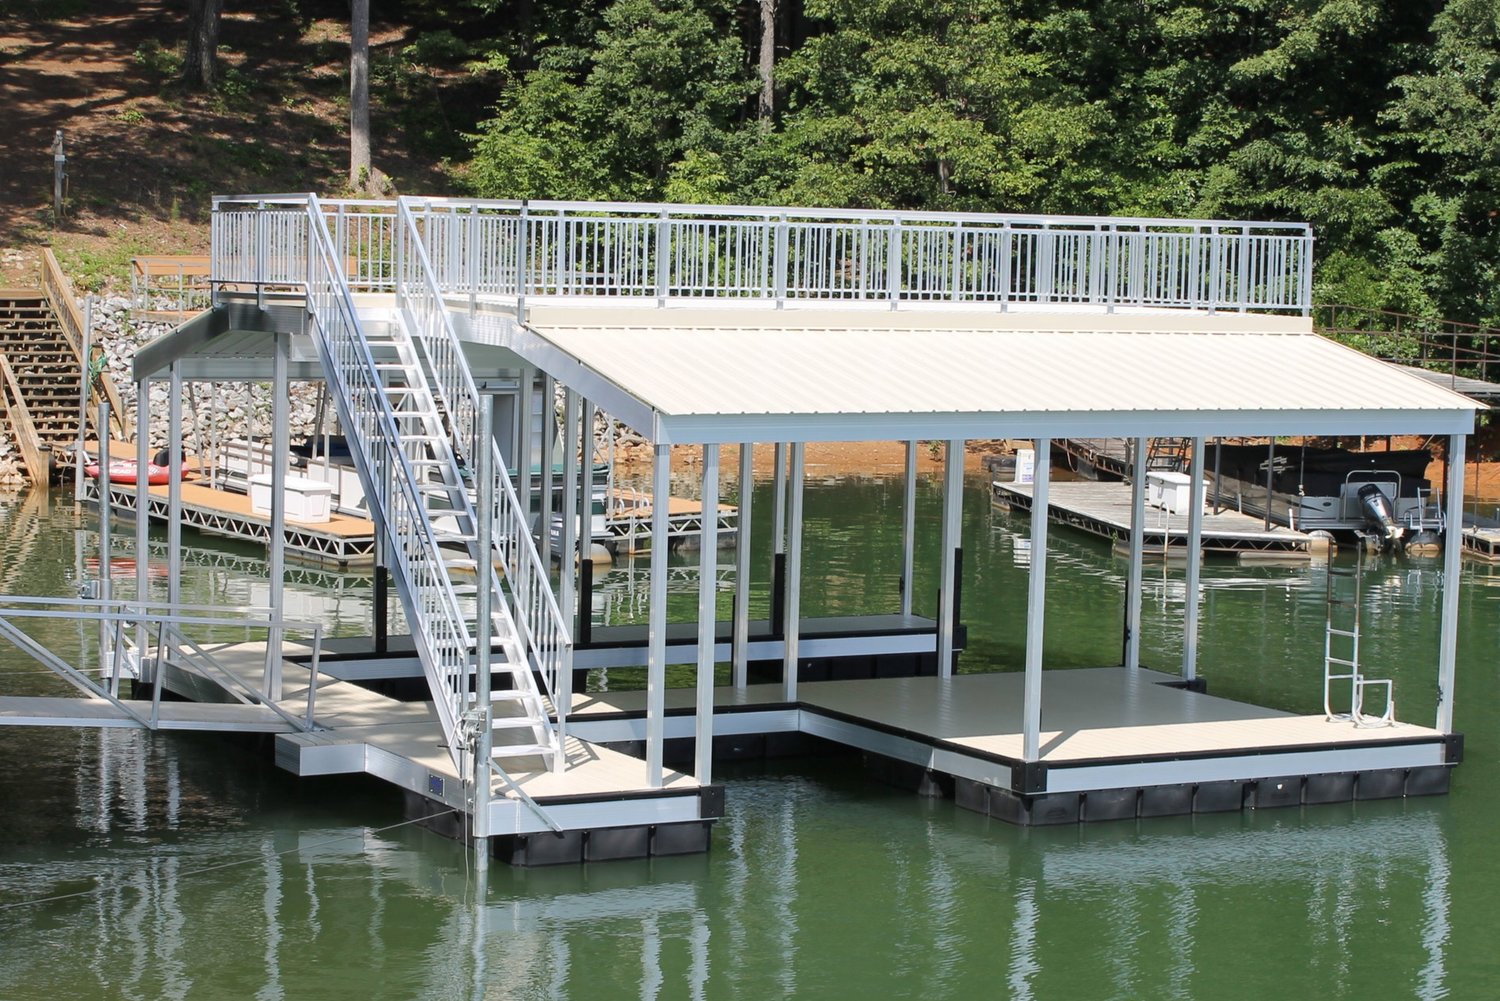 A scenic dock adorned with stairs, merging functionality and aesthetics.